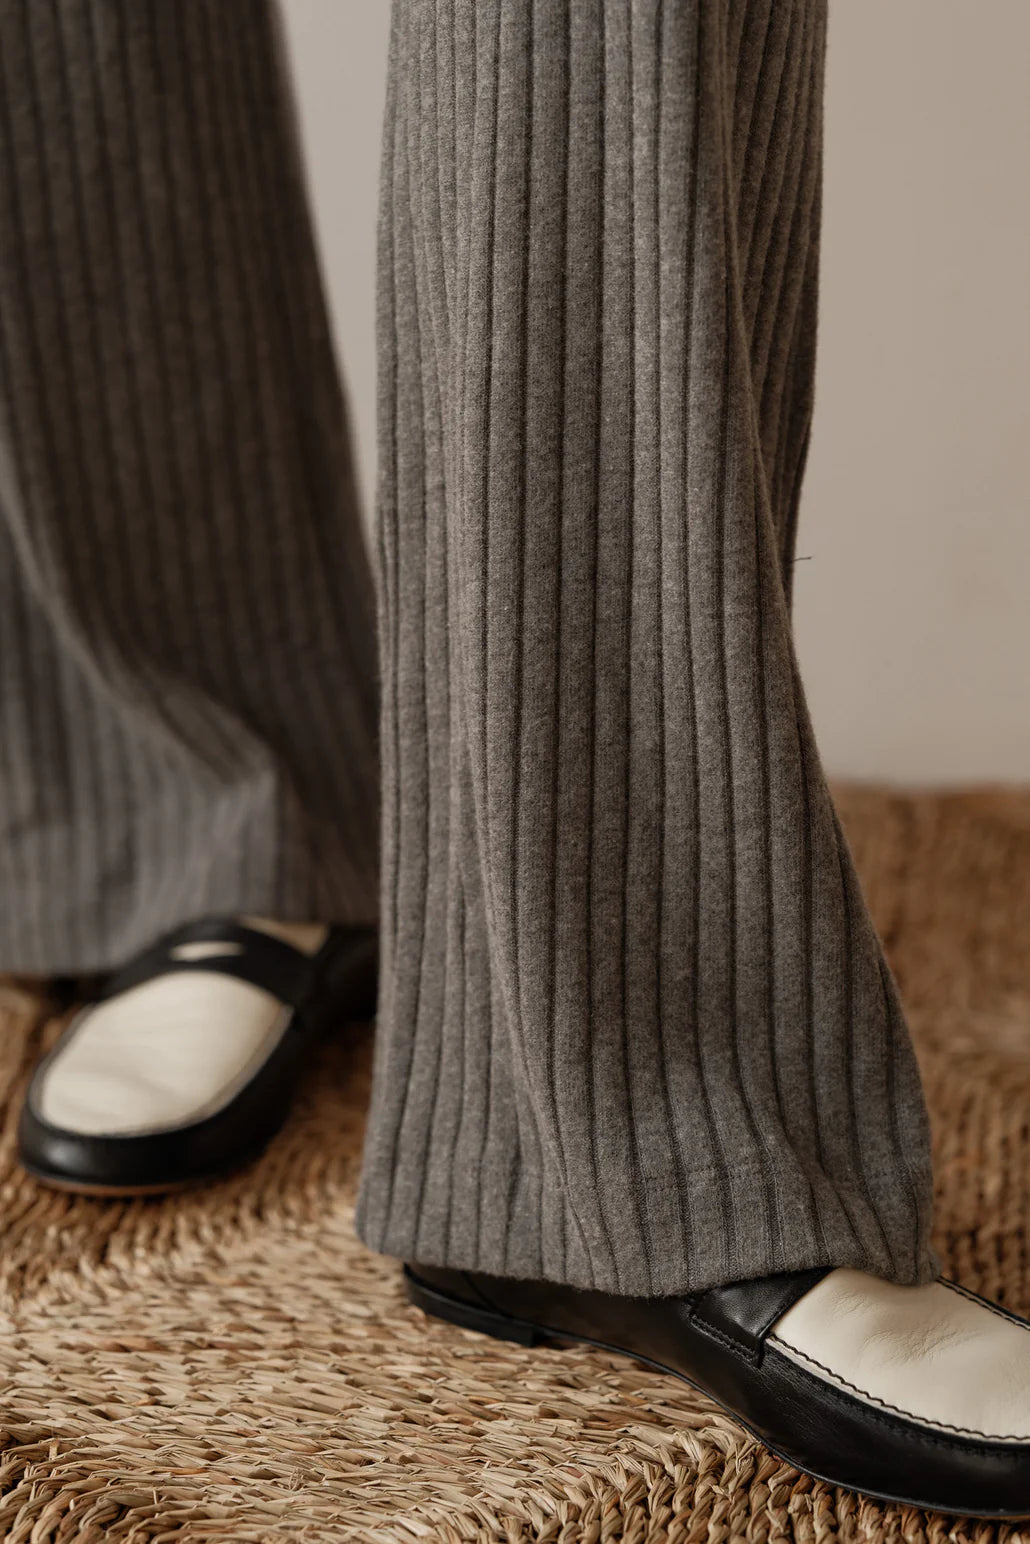 A close up detail image of the Sweater Rib Simple in Charcoal bottom hem, styled on a female model wearing a black and white loafer shoe